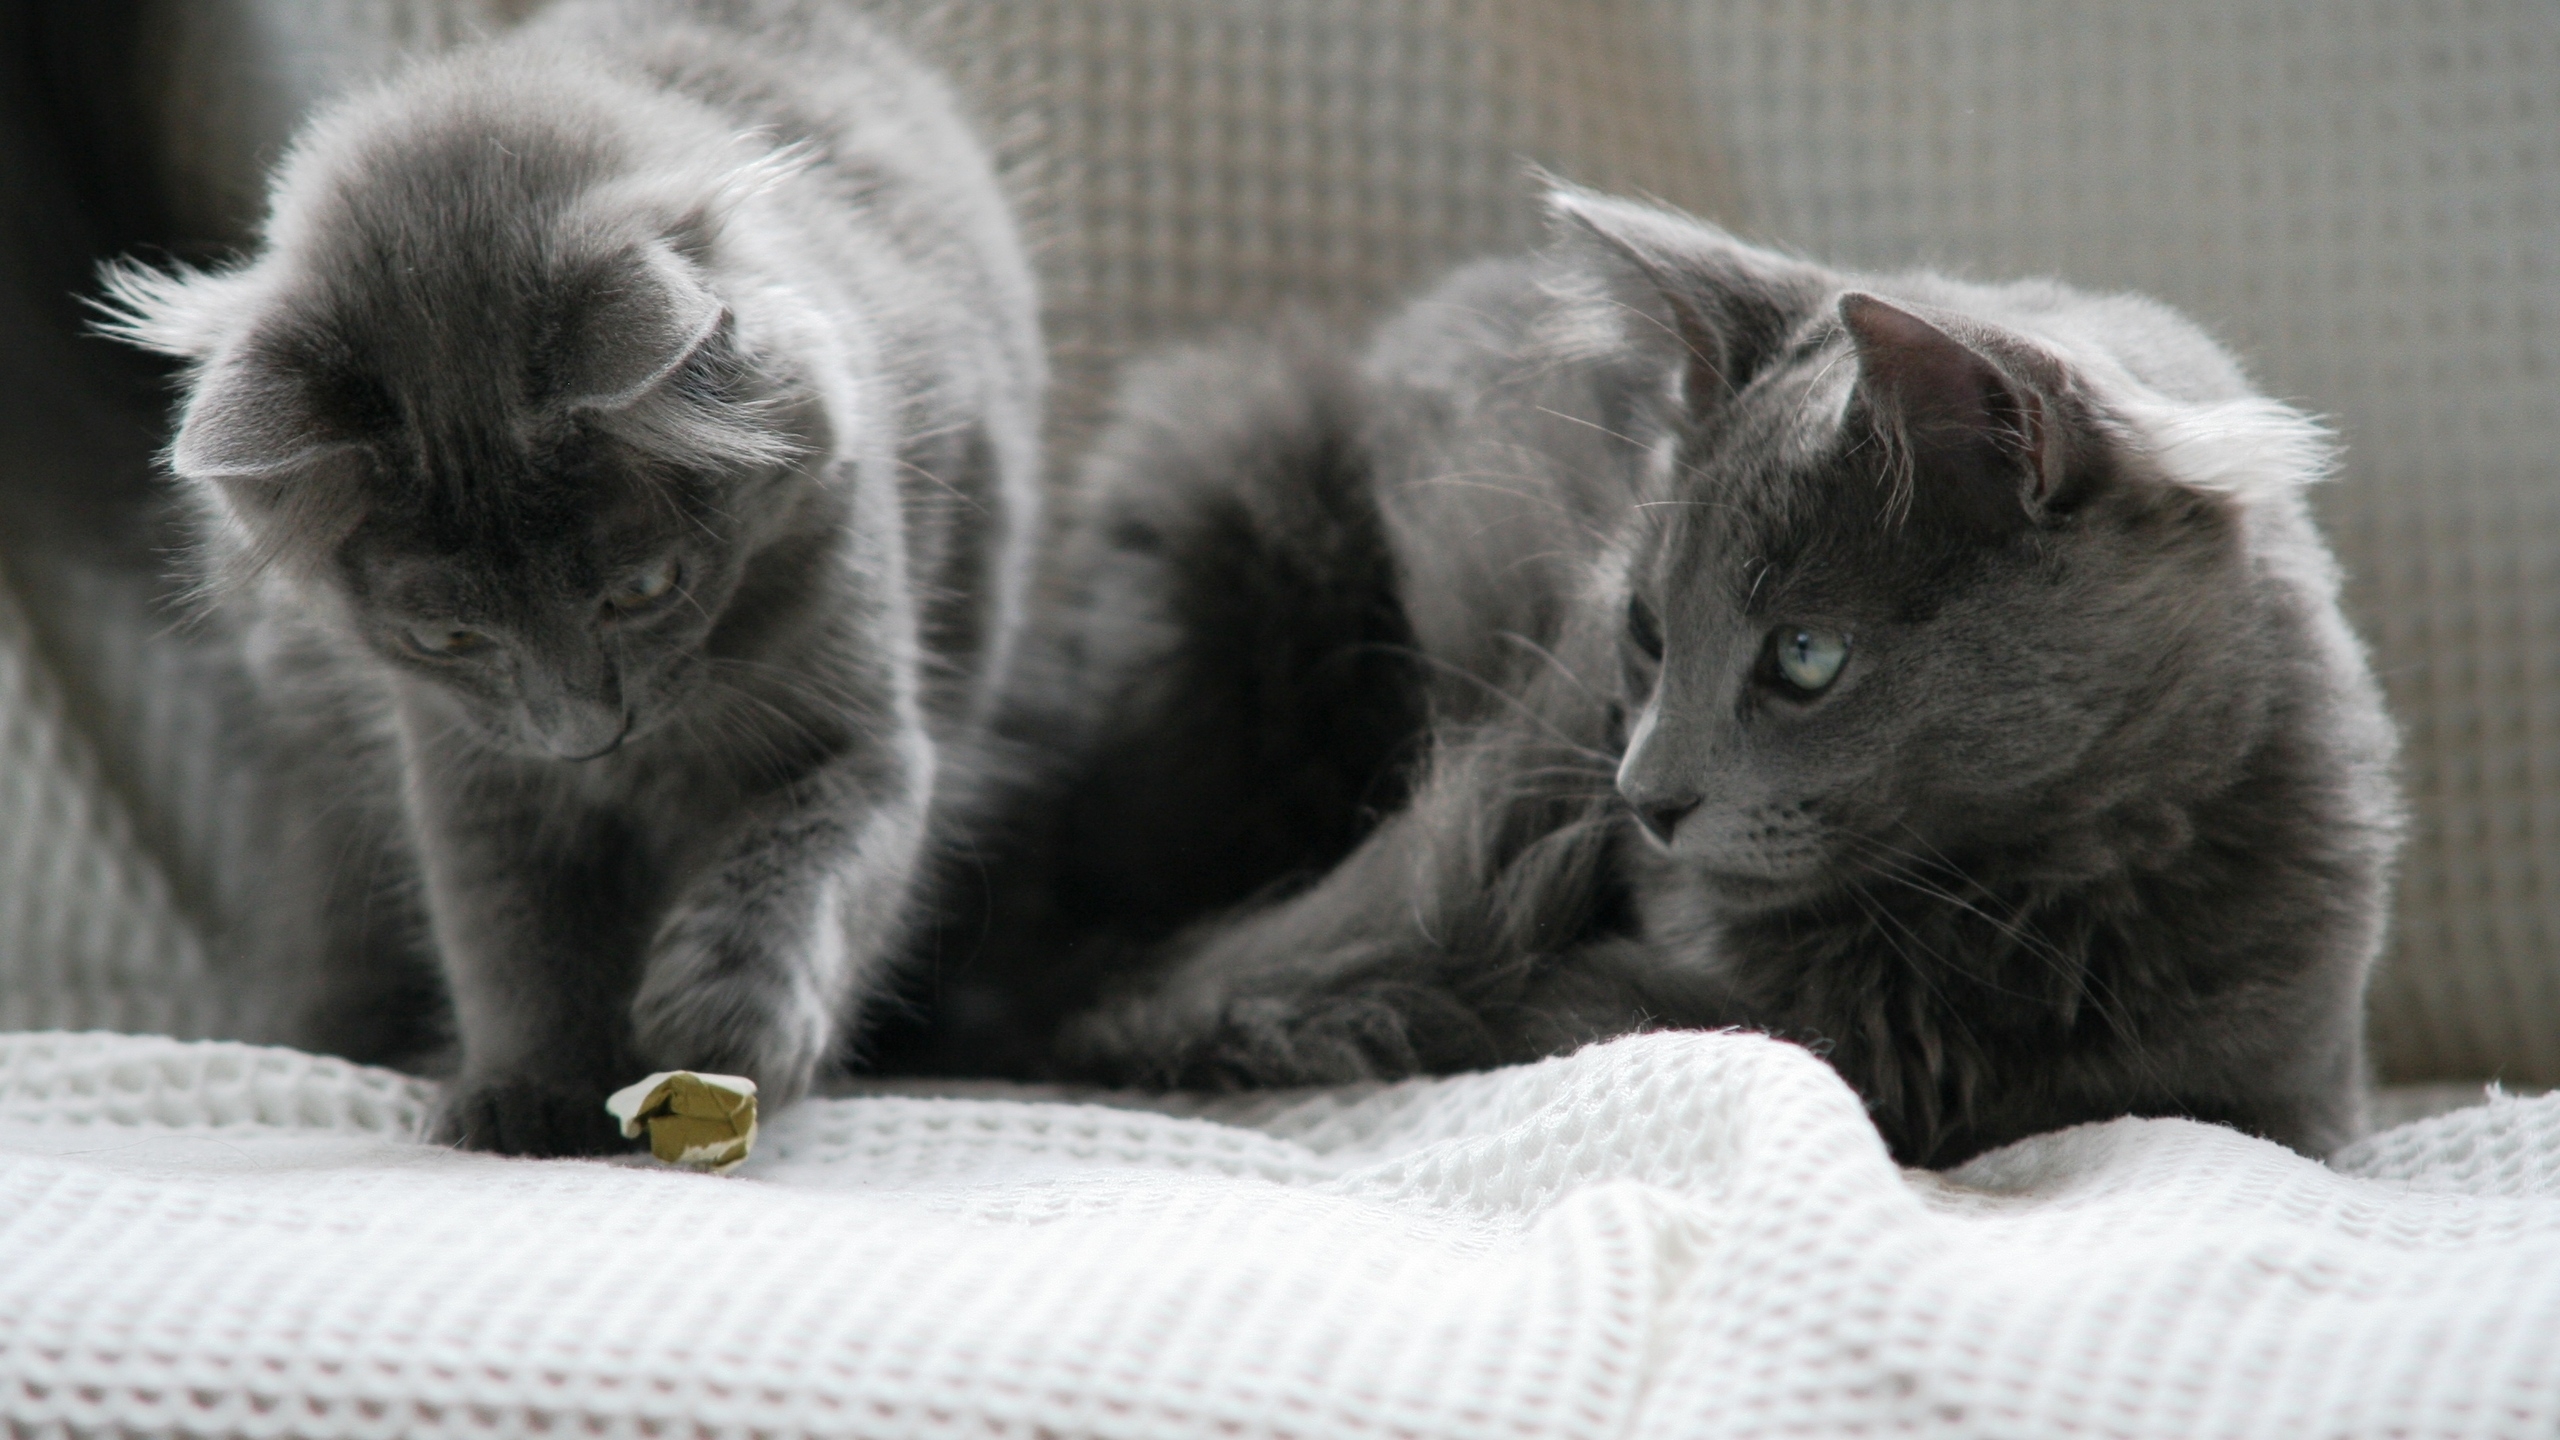 Beautiful Pair of Nebelung Cats for 2560x1440 HDTV resolution